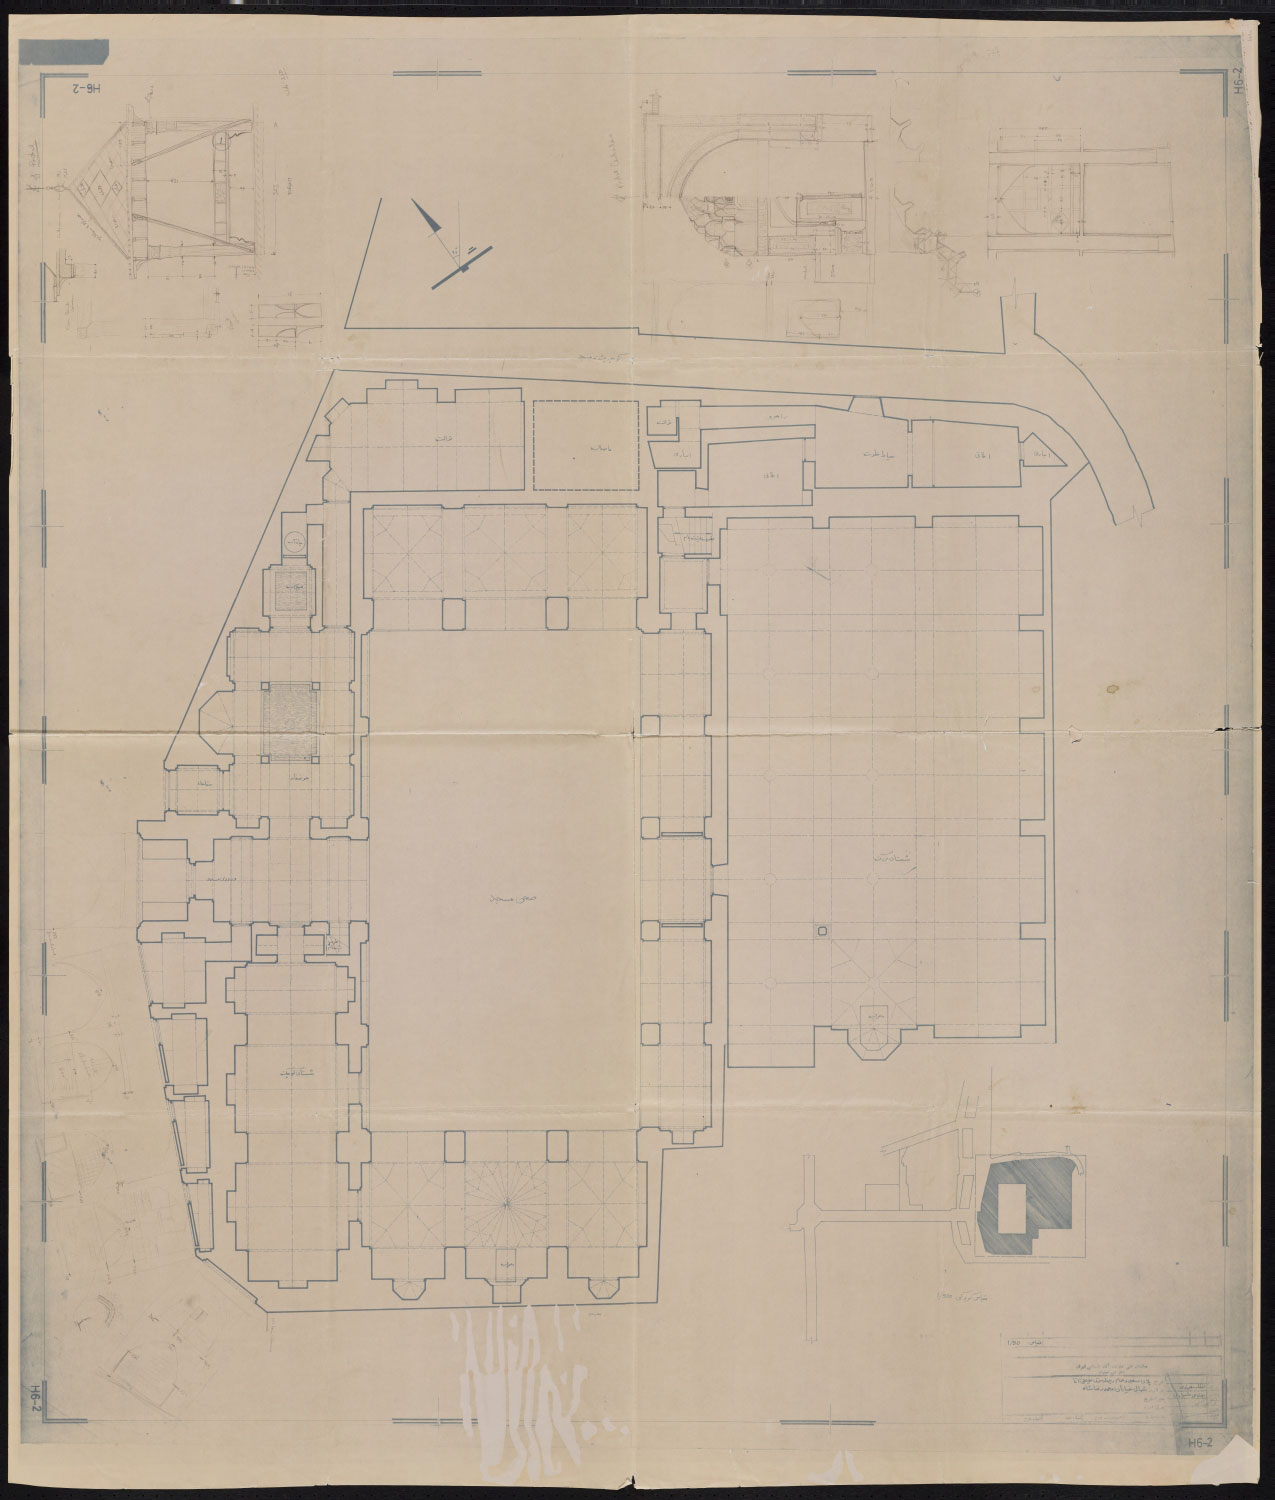 Plan of mosque with elevations of facade facing street drawn in pencil.